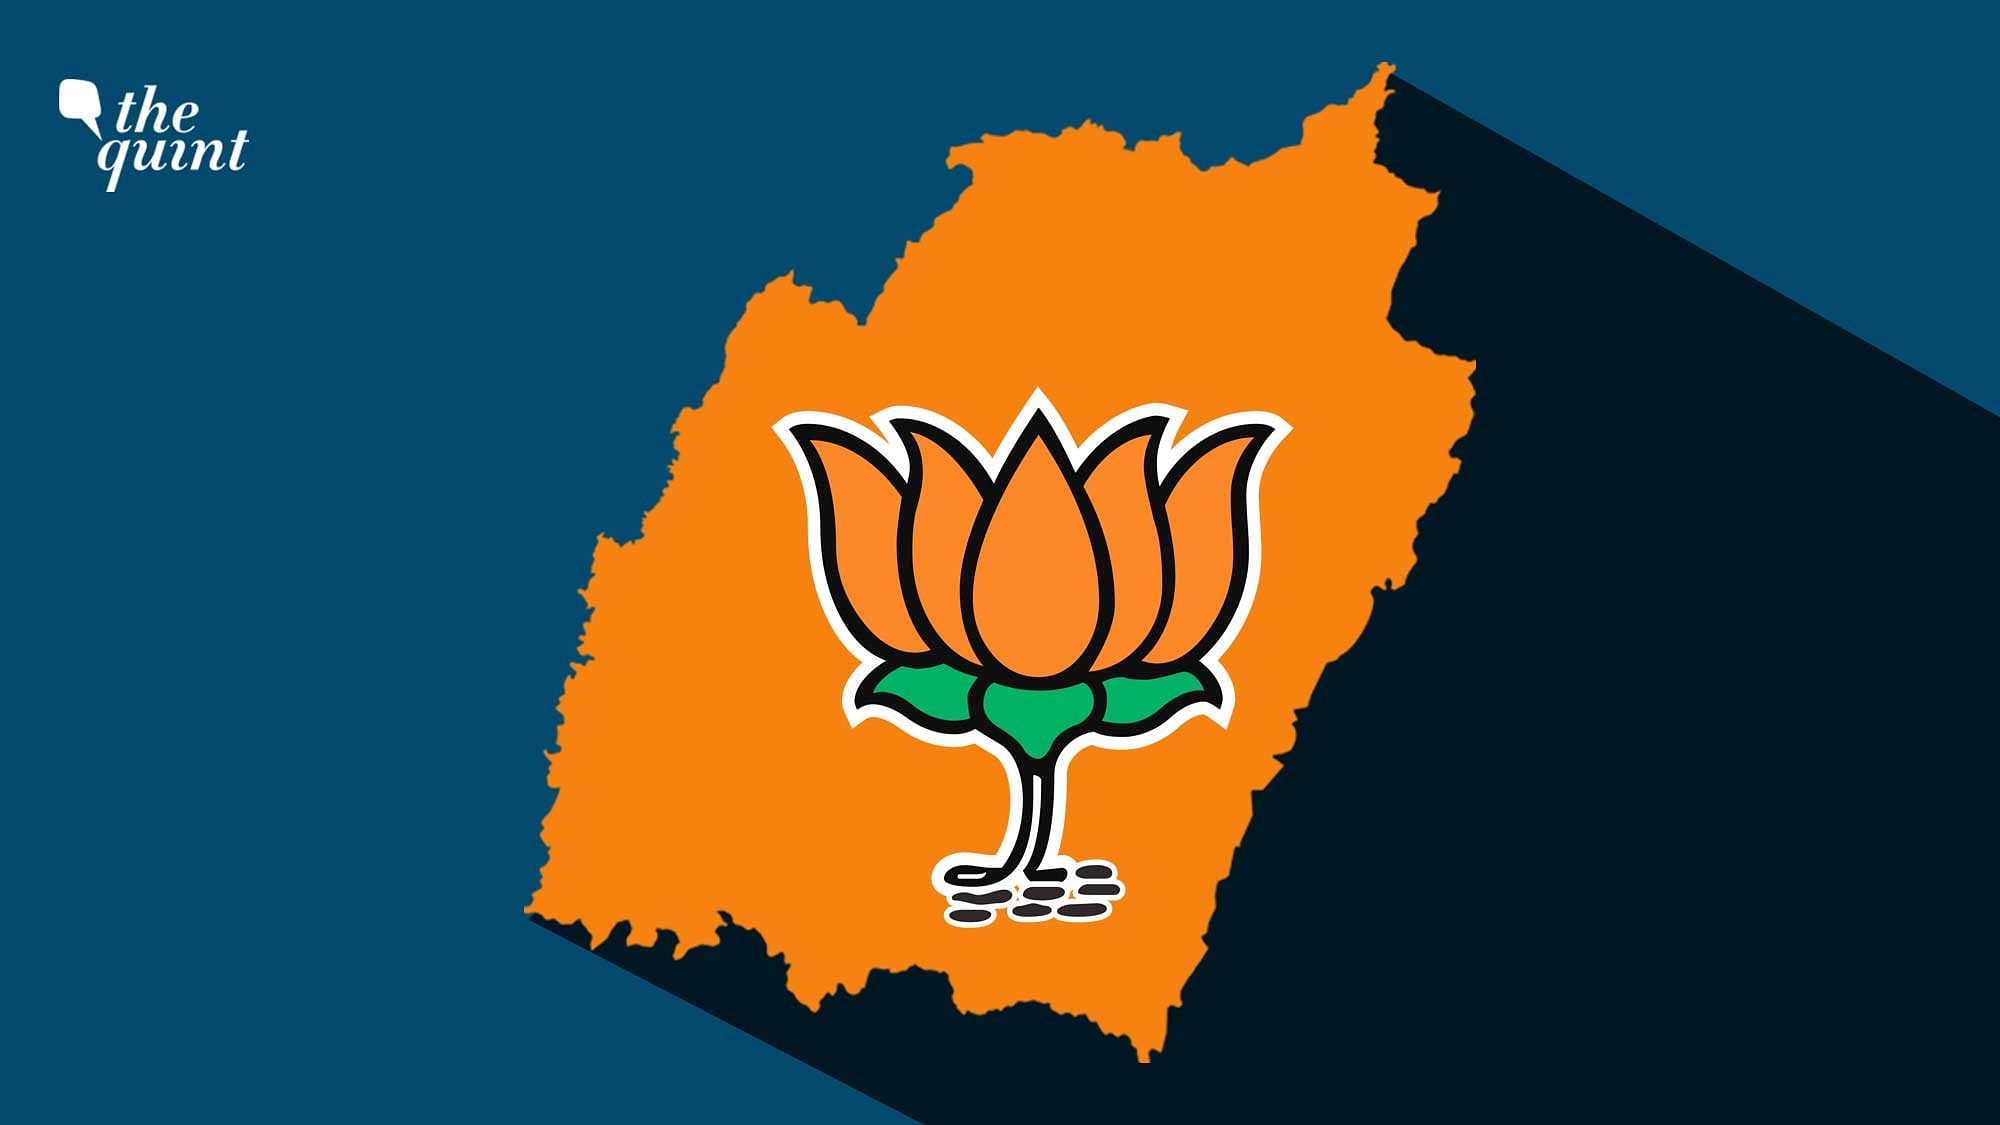 <div class="paragraphs"><p>The BJP has won&nbsp;<a href="https://www.thequint.com/elections/manipur-election-result-2022-live-counting-of-votes-phase-1-2-congress-bjp-npp">with a clear majority of 32 seats</a>.&nbsp;</p></div>